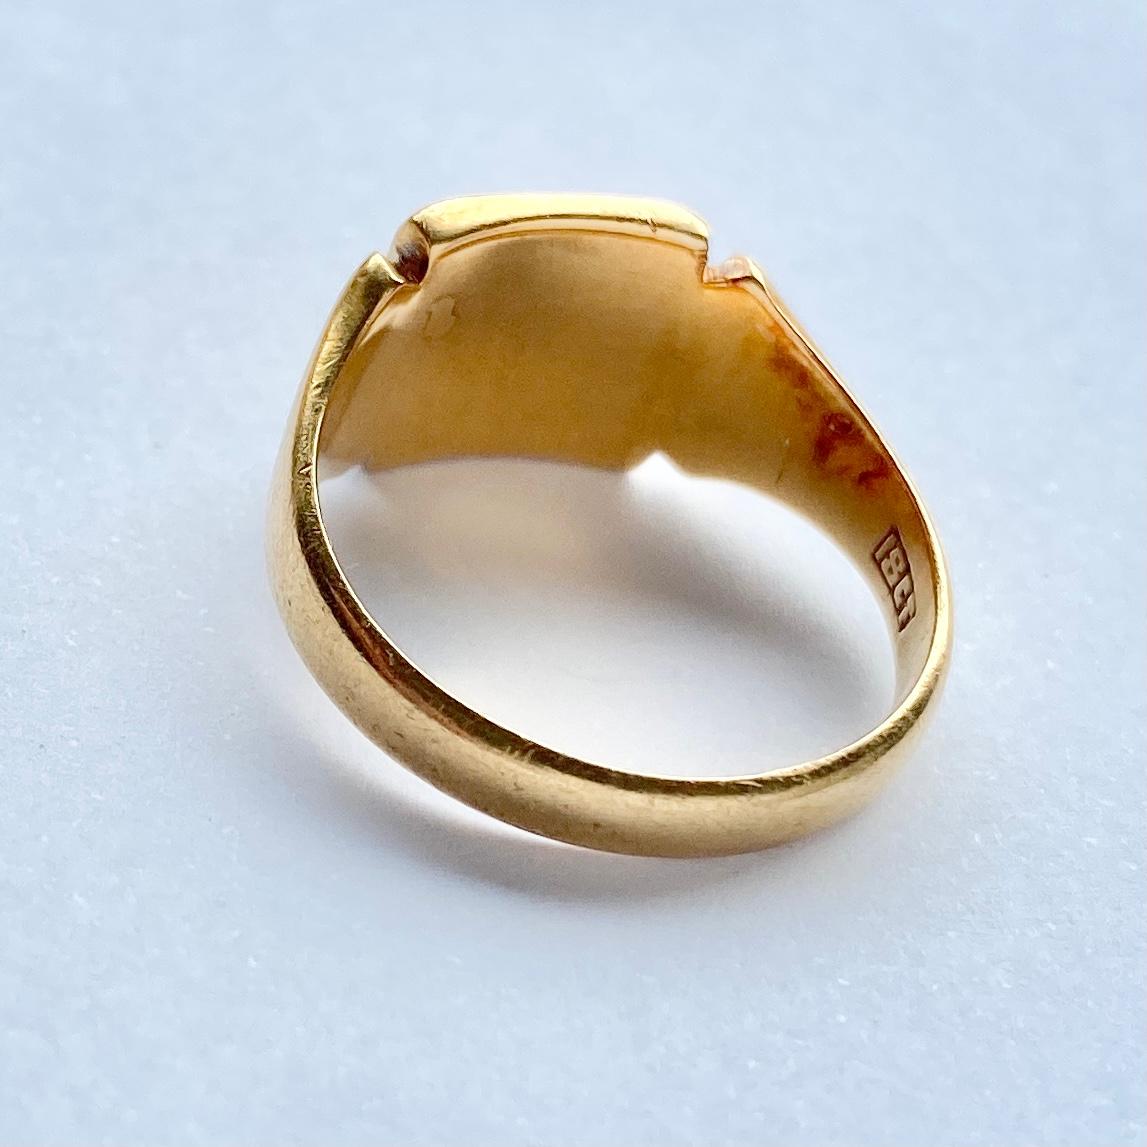 This sweet signet is modelled in 9ct gold and has a face with the initials 'DL' engraved into it. 

Ring Size: Q or 8 1/4 
Face Dimensions: 10.5x10.5mm 

Weight: 6.7g